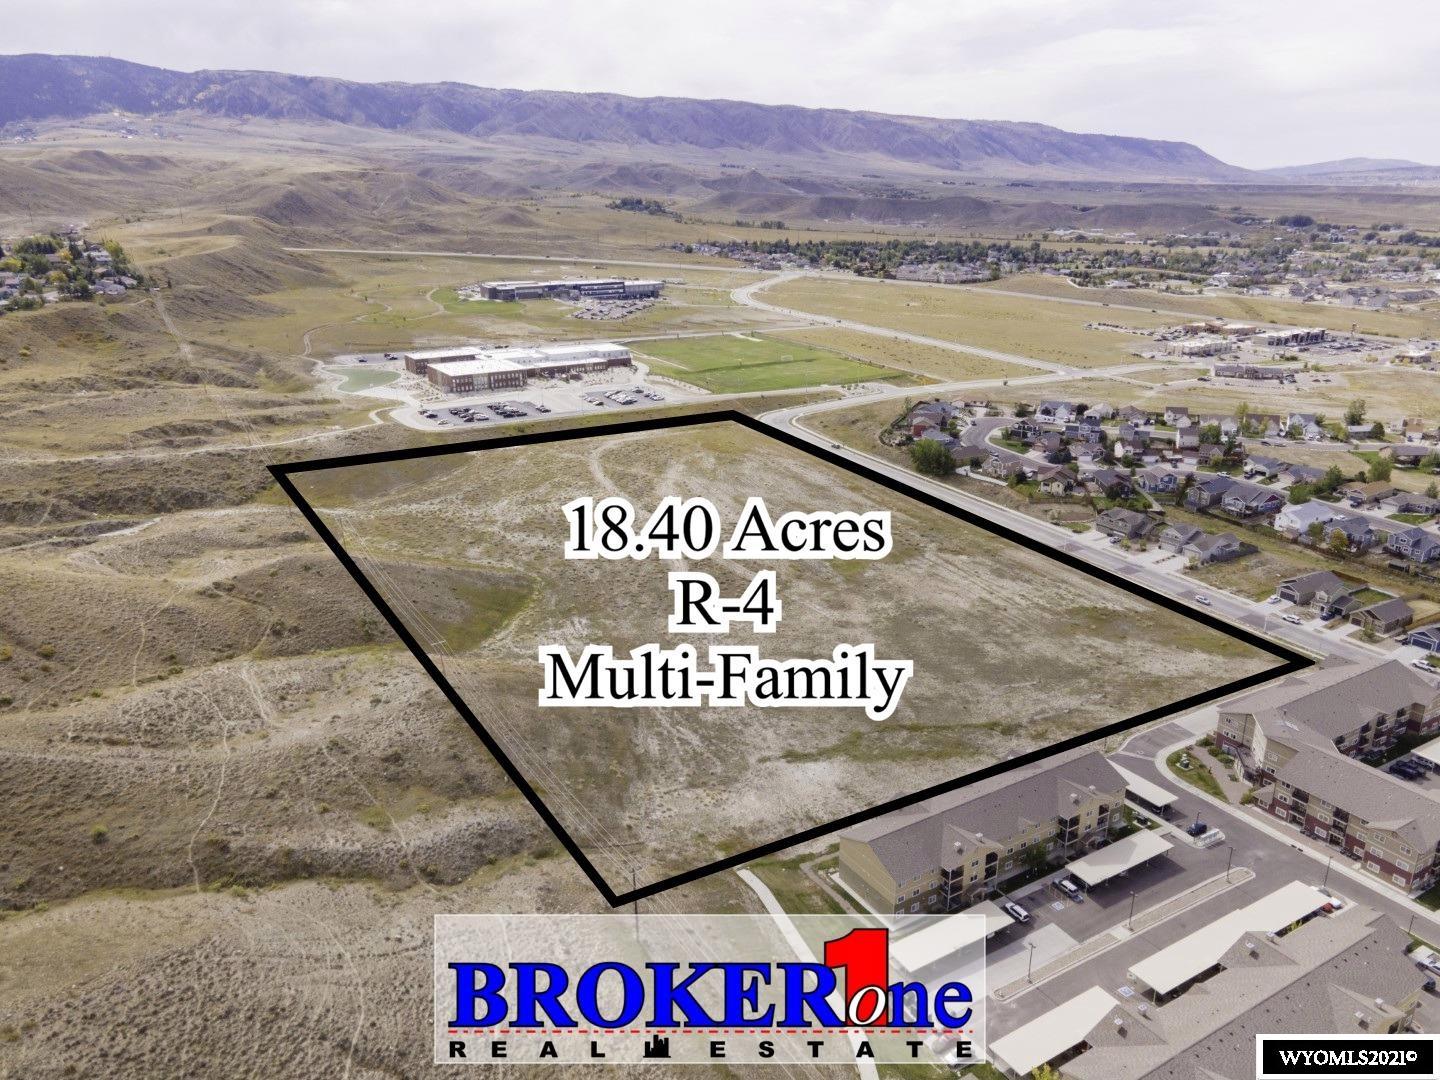 Over 18 acres of fully developed, masterplanned high-density residential land ready for vertical construction.  Traffic generators include Walmart SuperCenter, Studio City at Mesa 10-screen digital theater, City Brew Coffee, Fuzzy’s Tacos, Mesa Primary Care, Reliant Federal Credit Union, McDonald’s, Taco Johns, Aaron’s Rents, AT&T , Casper Orthopedics and the LDS Temple (now under construction) are adjacent to or in close proximity. The Mesa, located in one of the most accessible parts of the city, is a 179-acre mixed use development.  This is one of the very few parcels in Casper that is  entitled for a large multi-family project.  Contact the listing broker for site plan, renderings and floor plans developed for a spec project on this property.